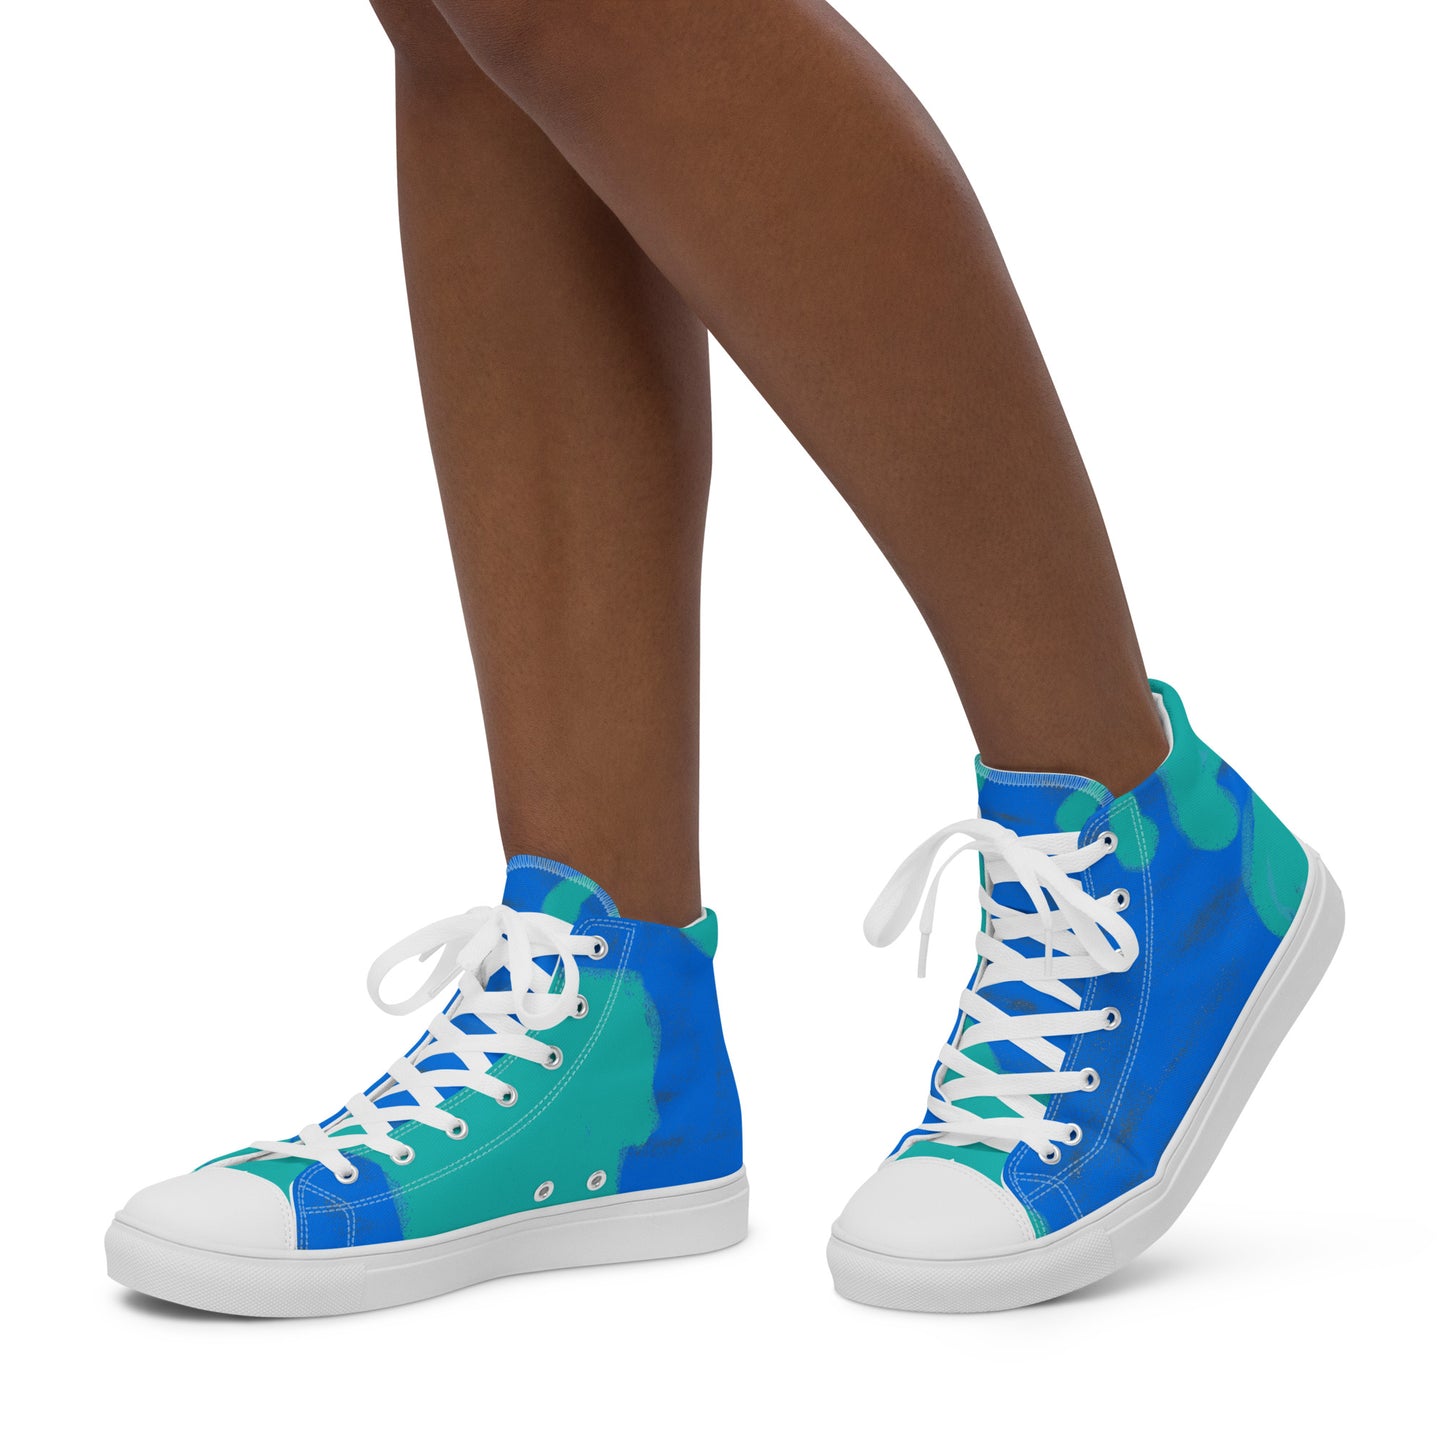 Earth - Women’s high top canvas shoes